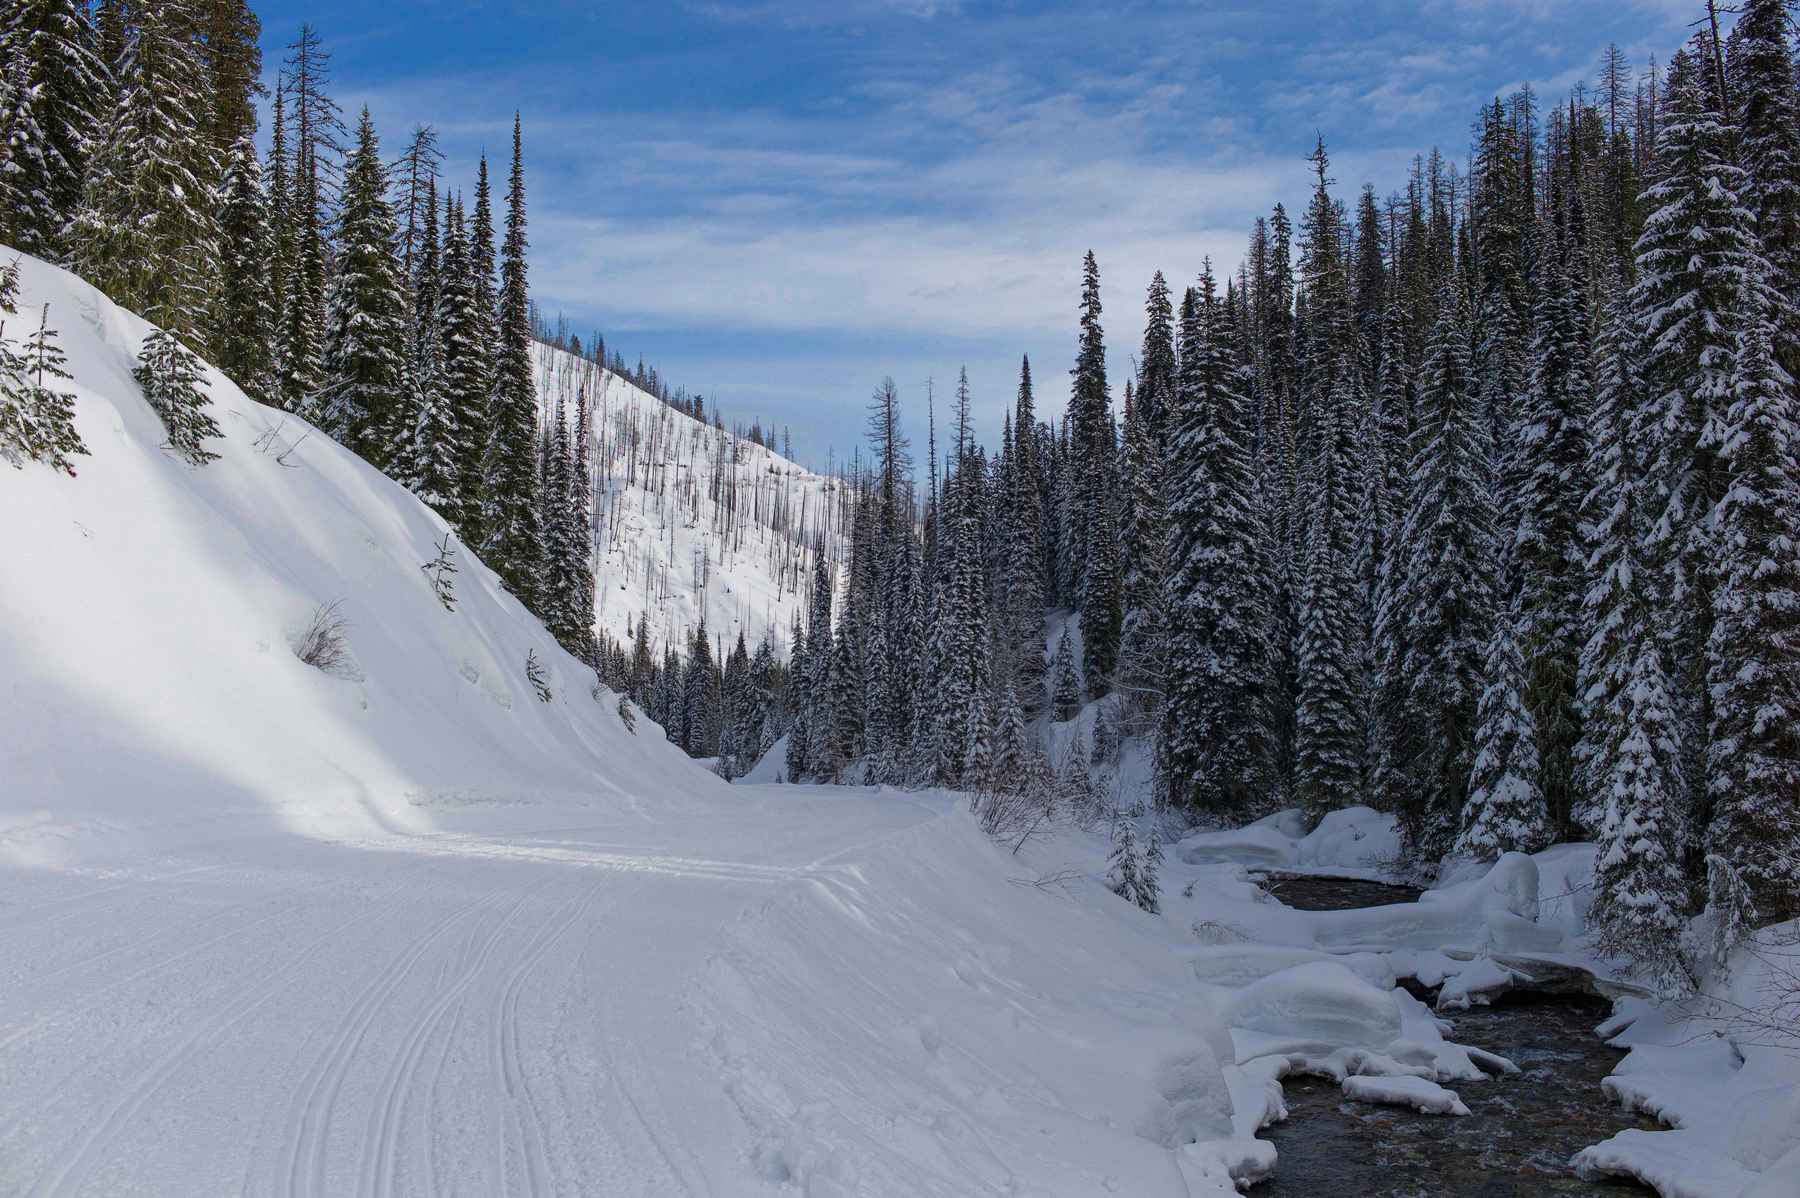 Heavy snowpacks to offer relief from 1200 year Western drought